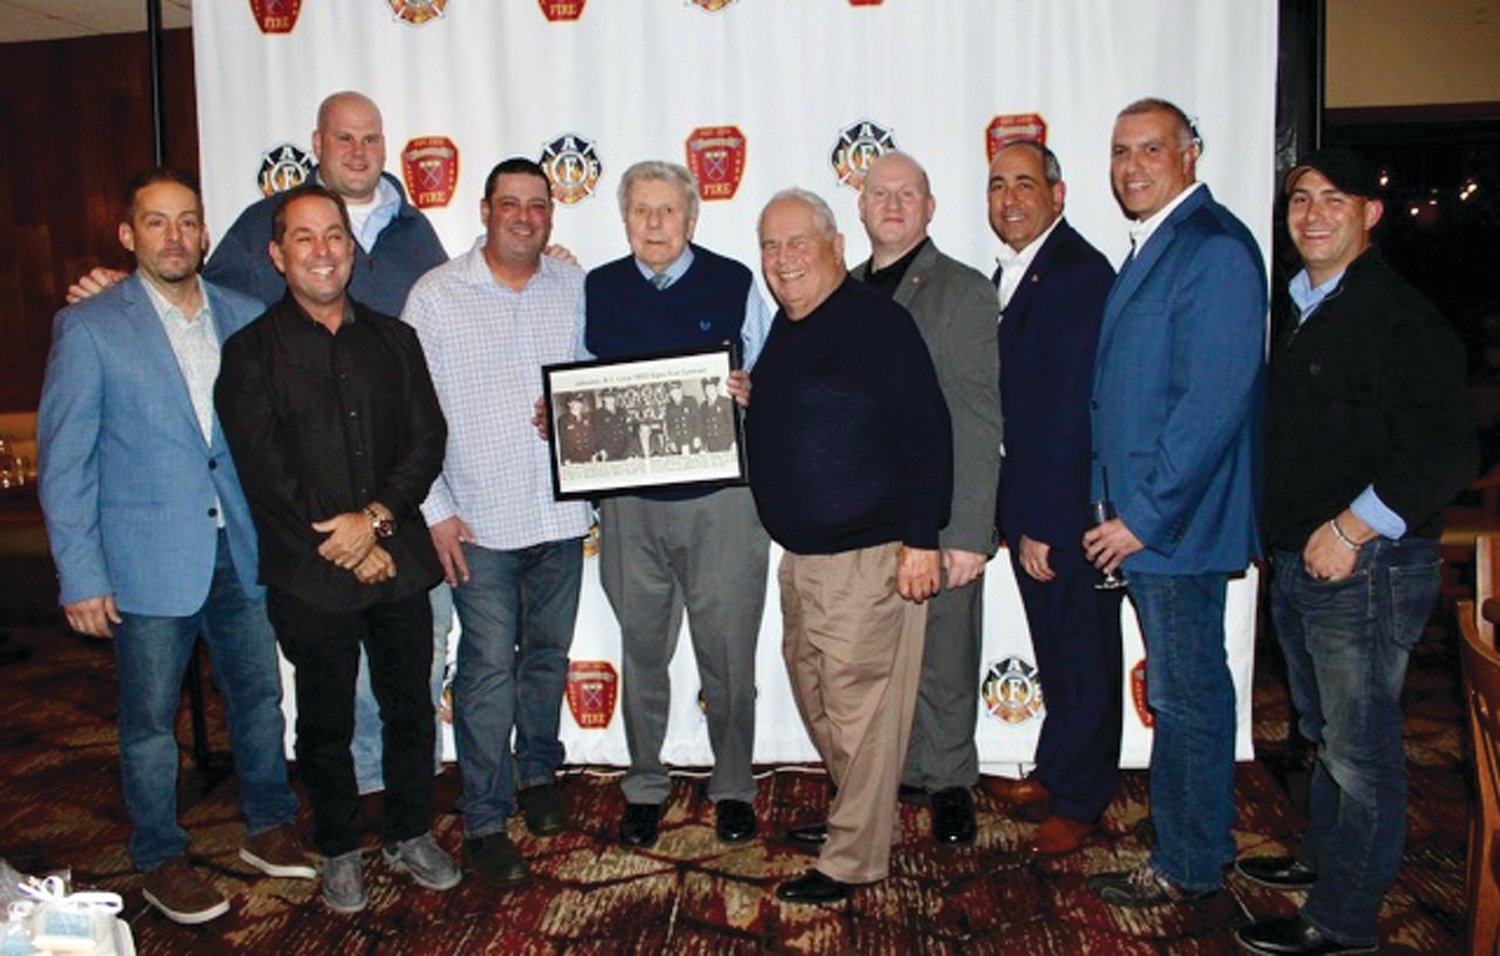 MILESTONE MEN: Local 1950’s current leadership joins former President Clayton Quick, Charter Member Alfred Masciarelli and former President Joseph Andriole during a special presentation at the recent 50th Anniversary Party. From left are: John Jasparro, David Pingitore, Don Roberts, Jon Pistacchio, Clayton Quick, Al Masciarelli, Keith Calci, Joe Andriole, Sal Martira and Chris DelFino.